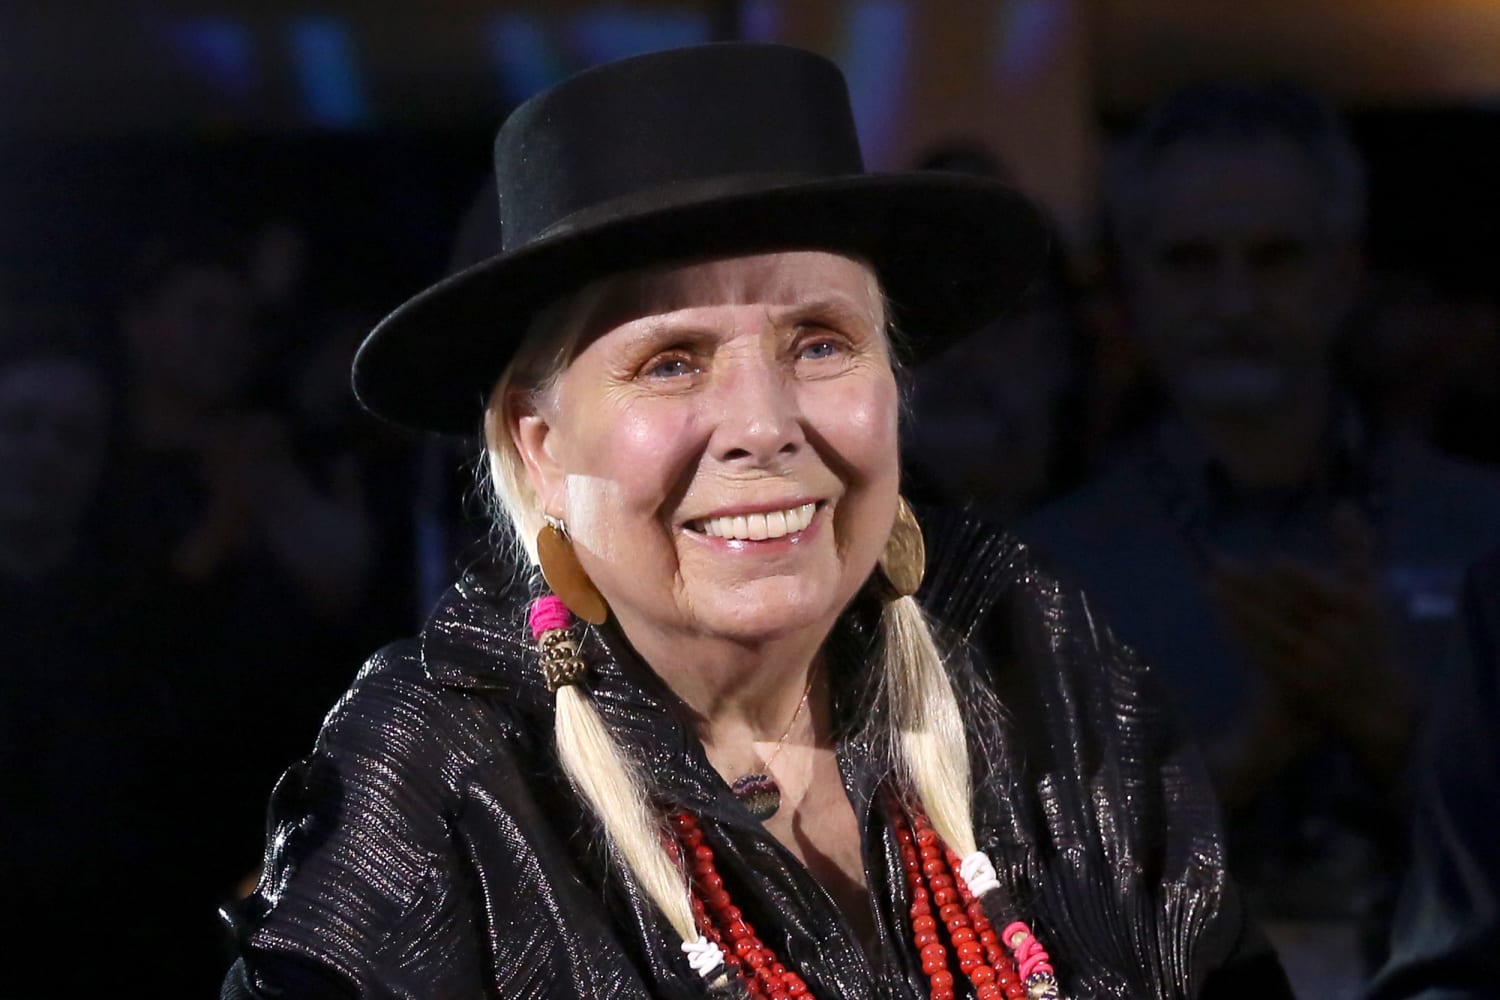 SpExit! Joni Mitchell pulls all music from Spotify, joining Neil Young in shunning same online platform as disinformation opportunist Joe Rogan